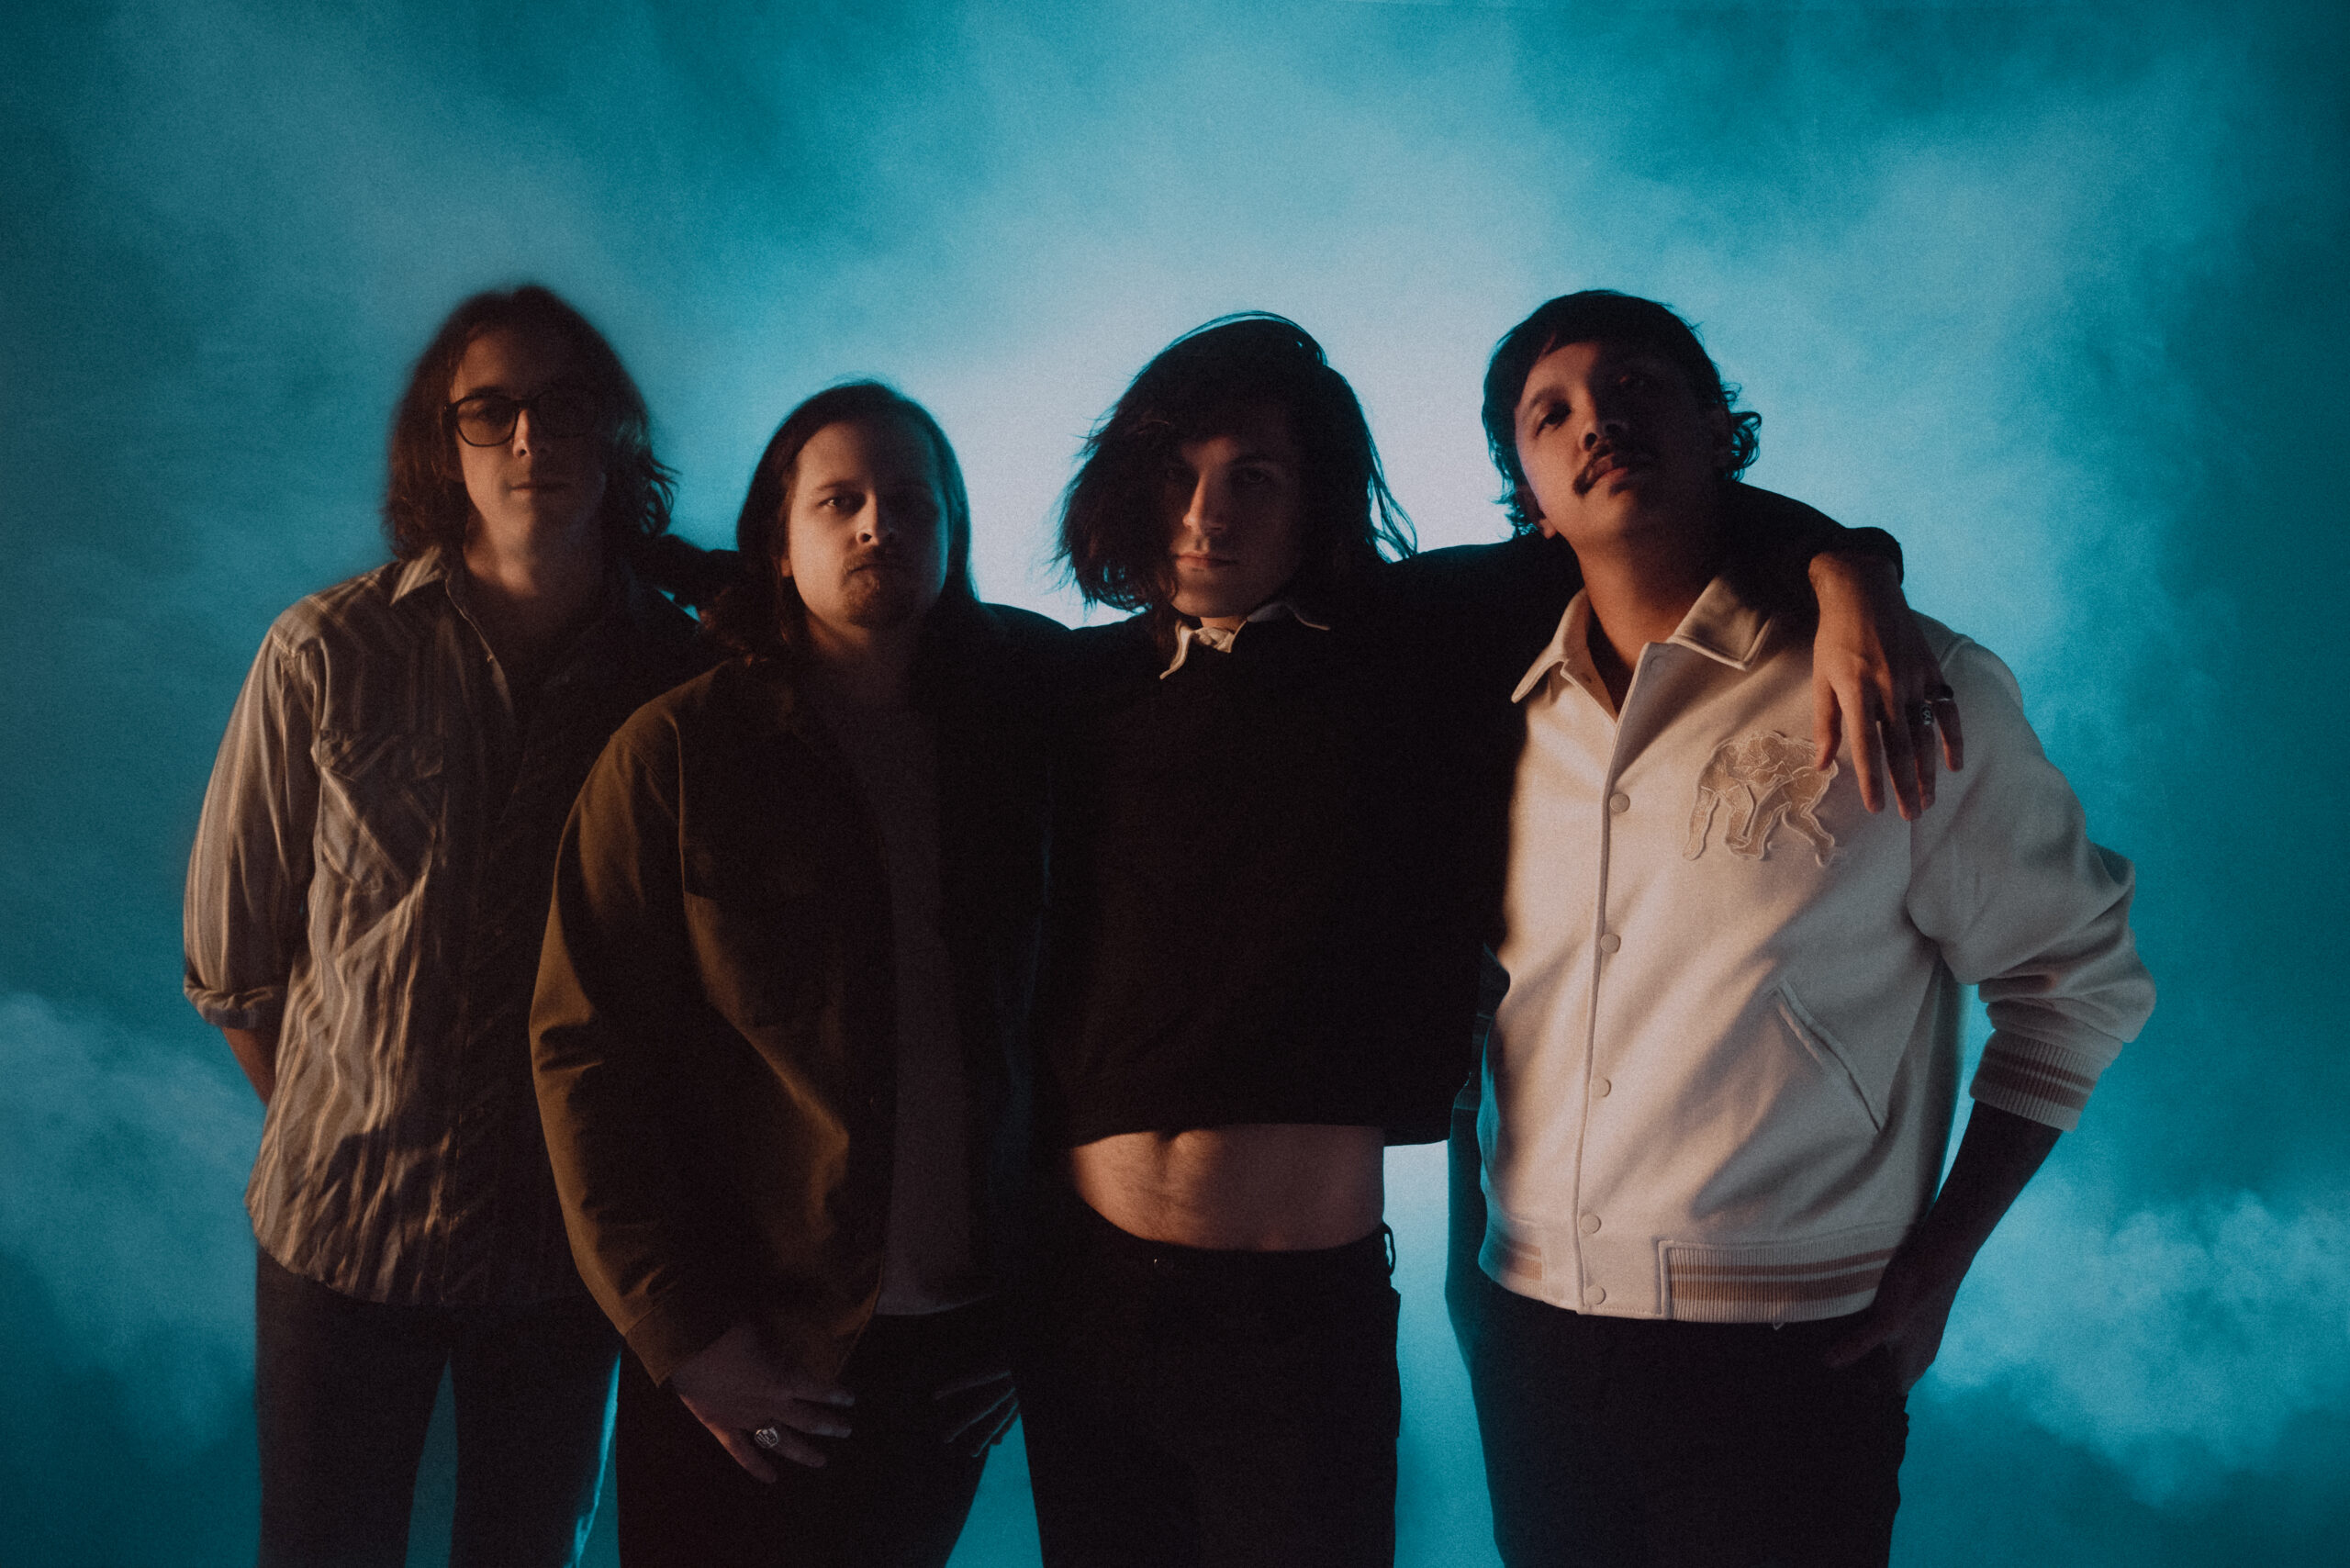 Hotel Mira’s “Everything Once” is chasing a moment